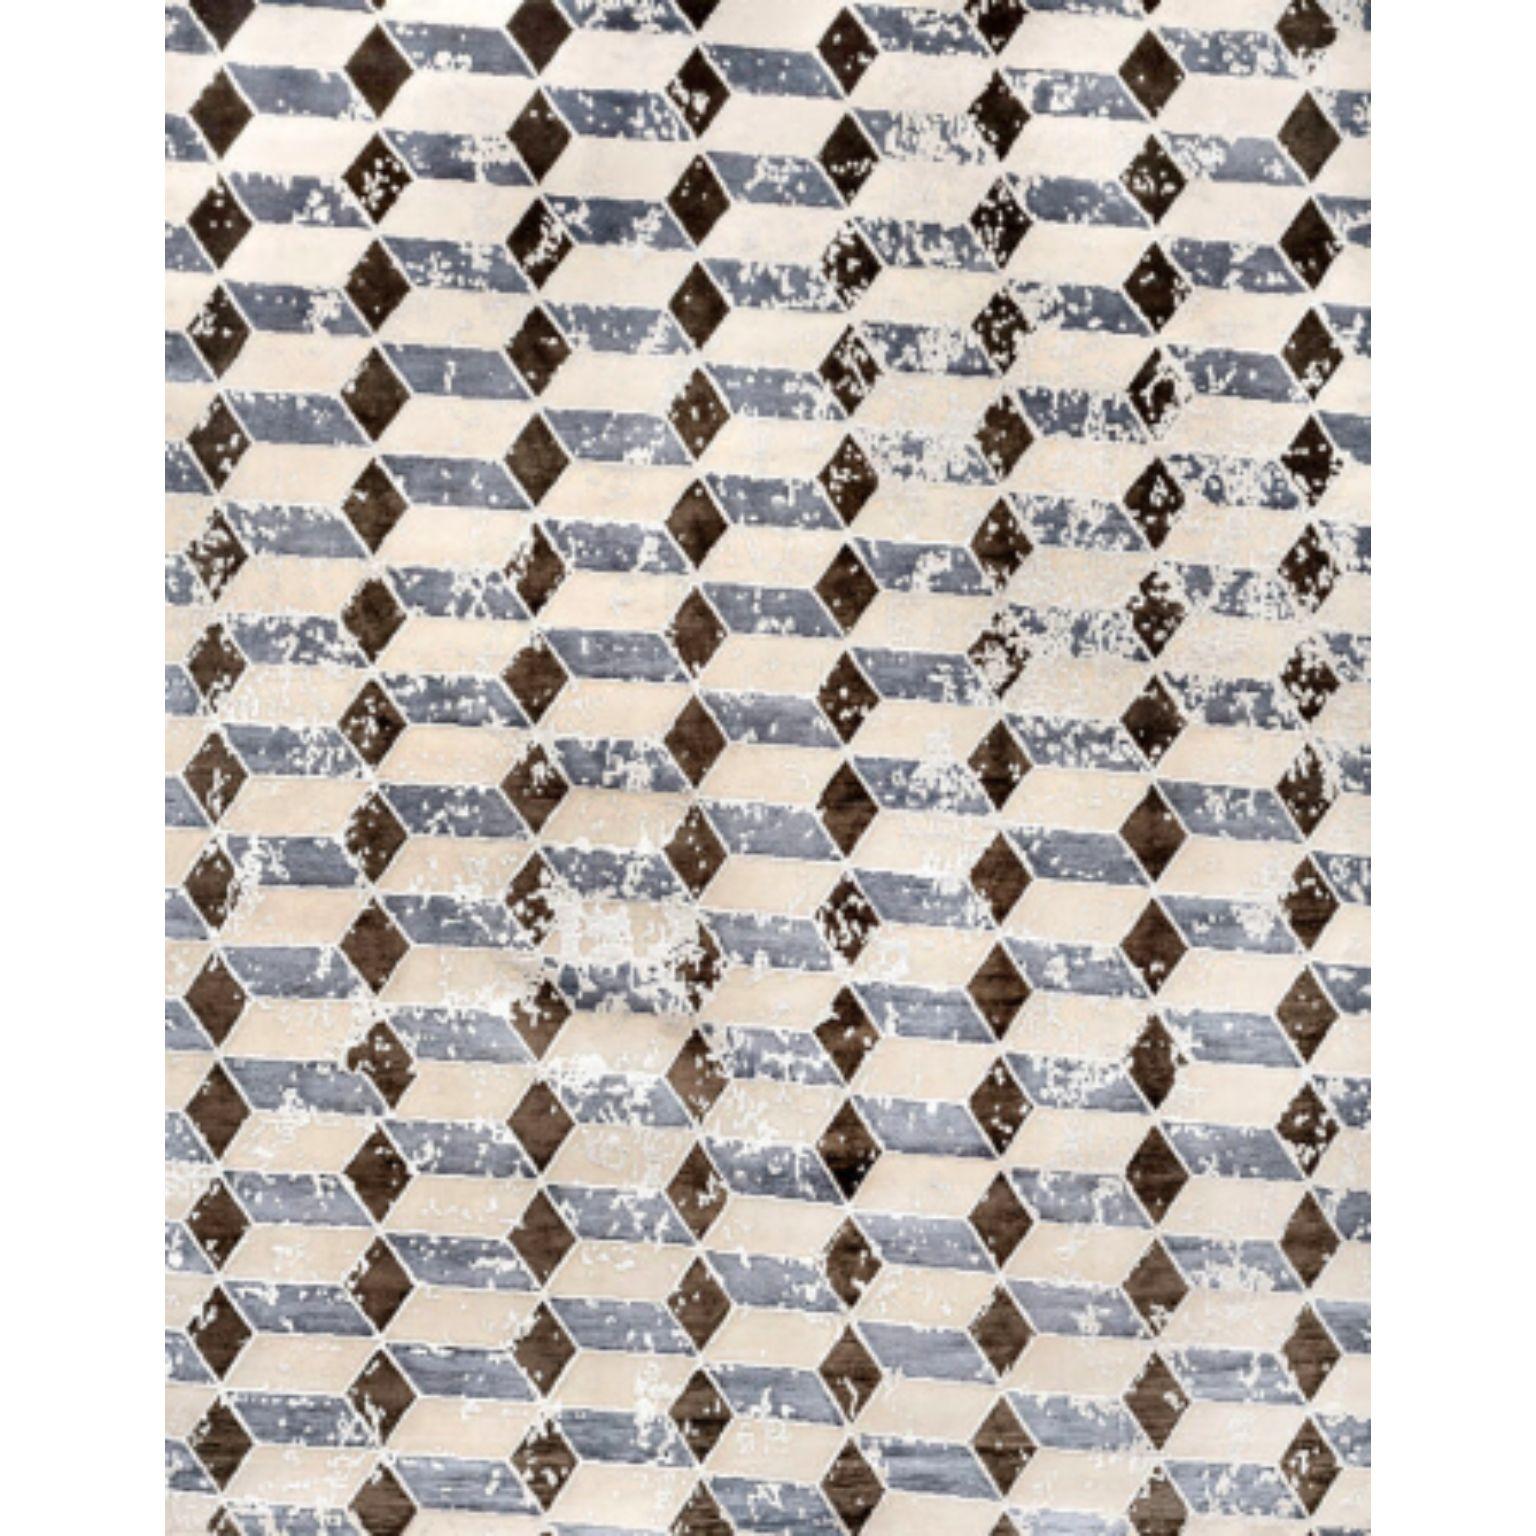 BRERA Rug by Illulian
Dimensions: D300 x H200 cm 
Materials: Wool 50%, Silk 50%
Variations available and prices may vary according to materials and sizes.

Illulian, historic and prestigious rug company brand, internationally renowned in the